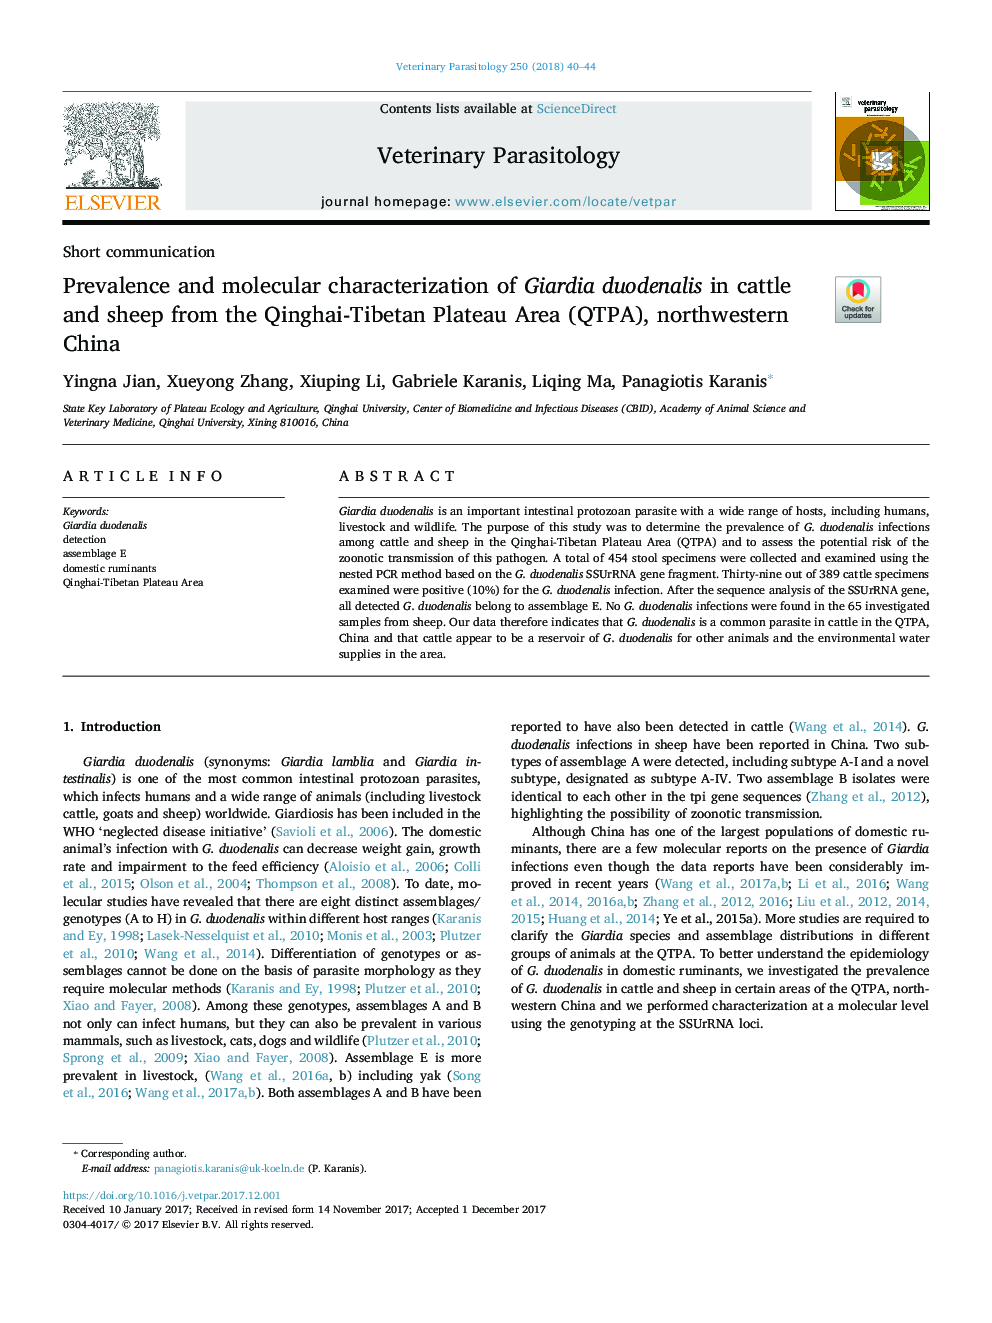 Prevalence and molecular characterization of Giardia duodenalis in cattle and sheep from the Qinghai-Tibetan Plateau Area (QTPA), northwestern China